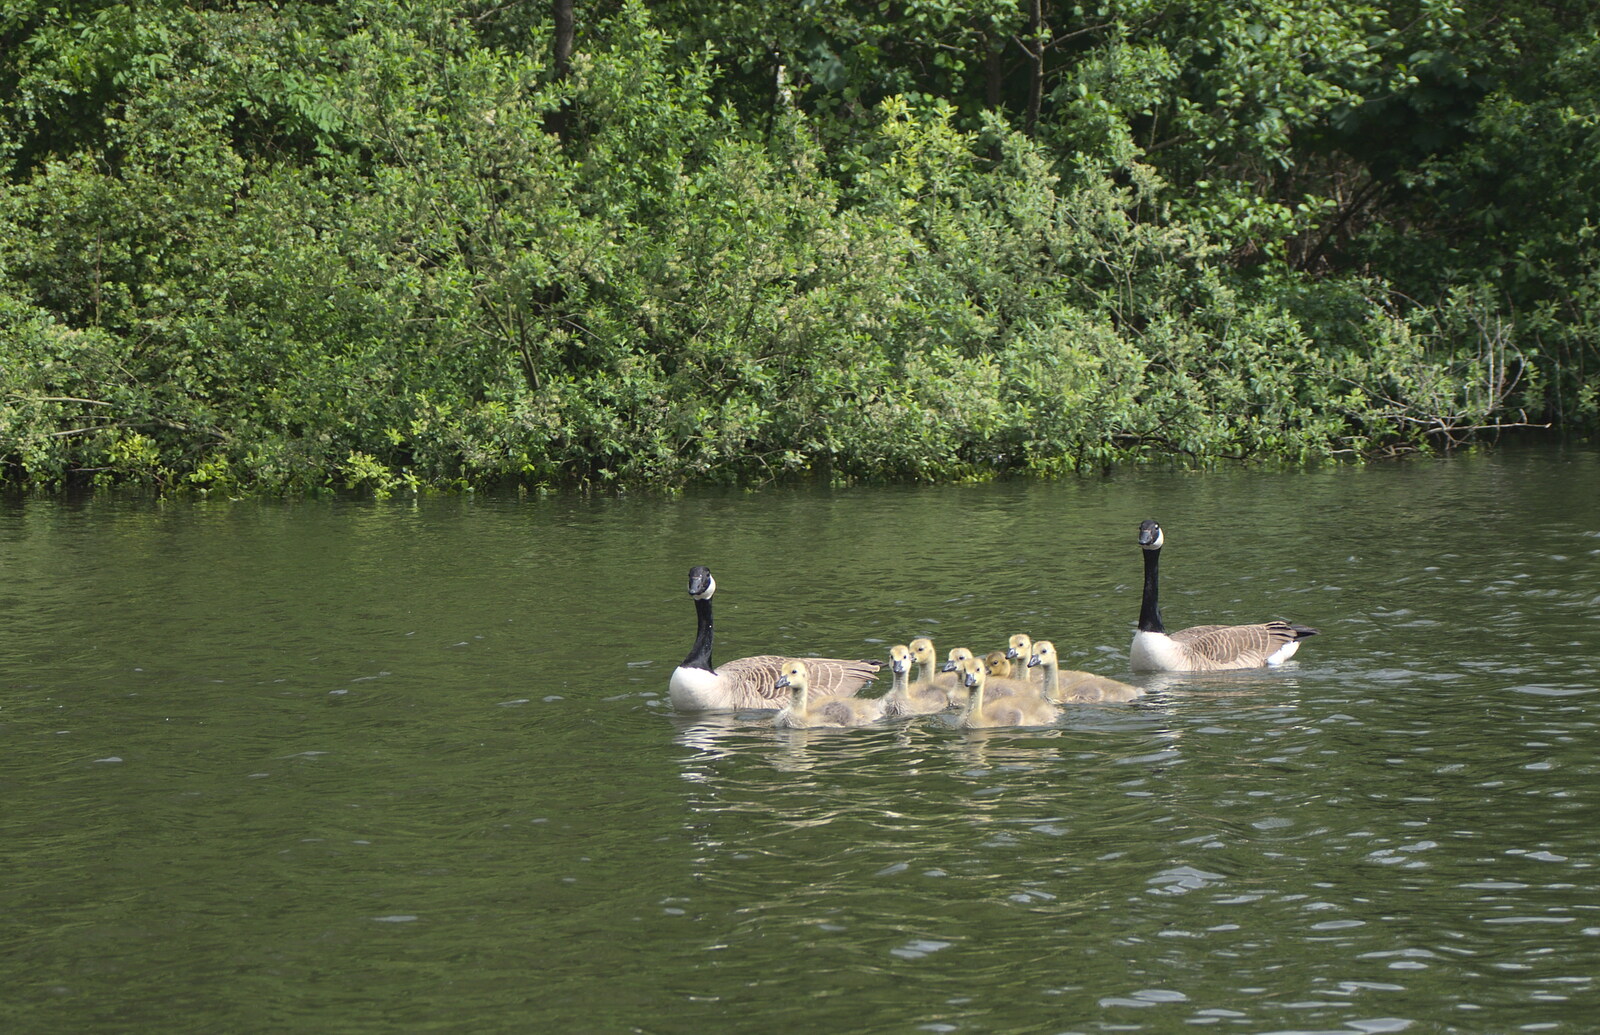 A family of Canada geese from A Trip on the Norfolk Broads, Wroxham, Norfolk - 25th May 2013